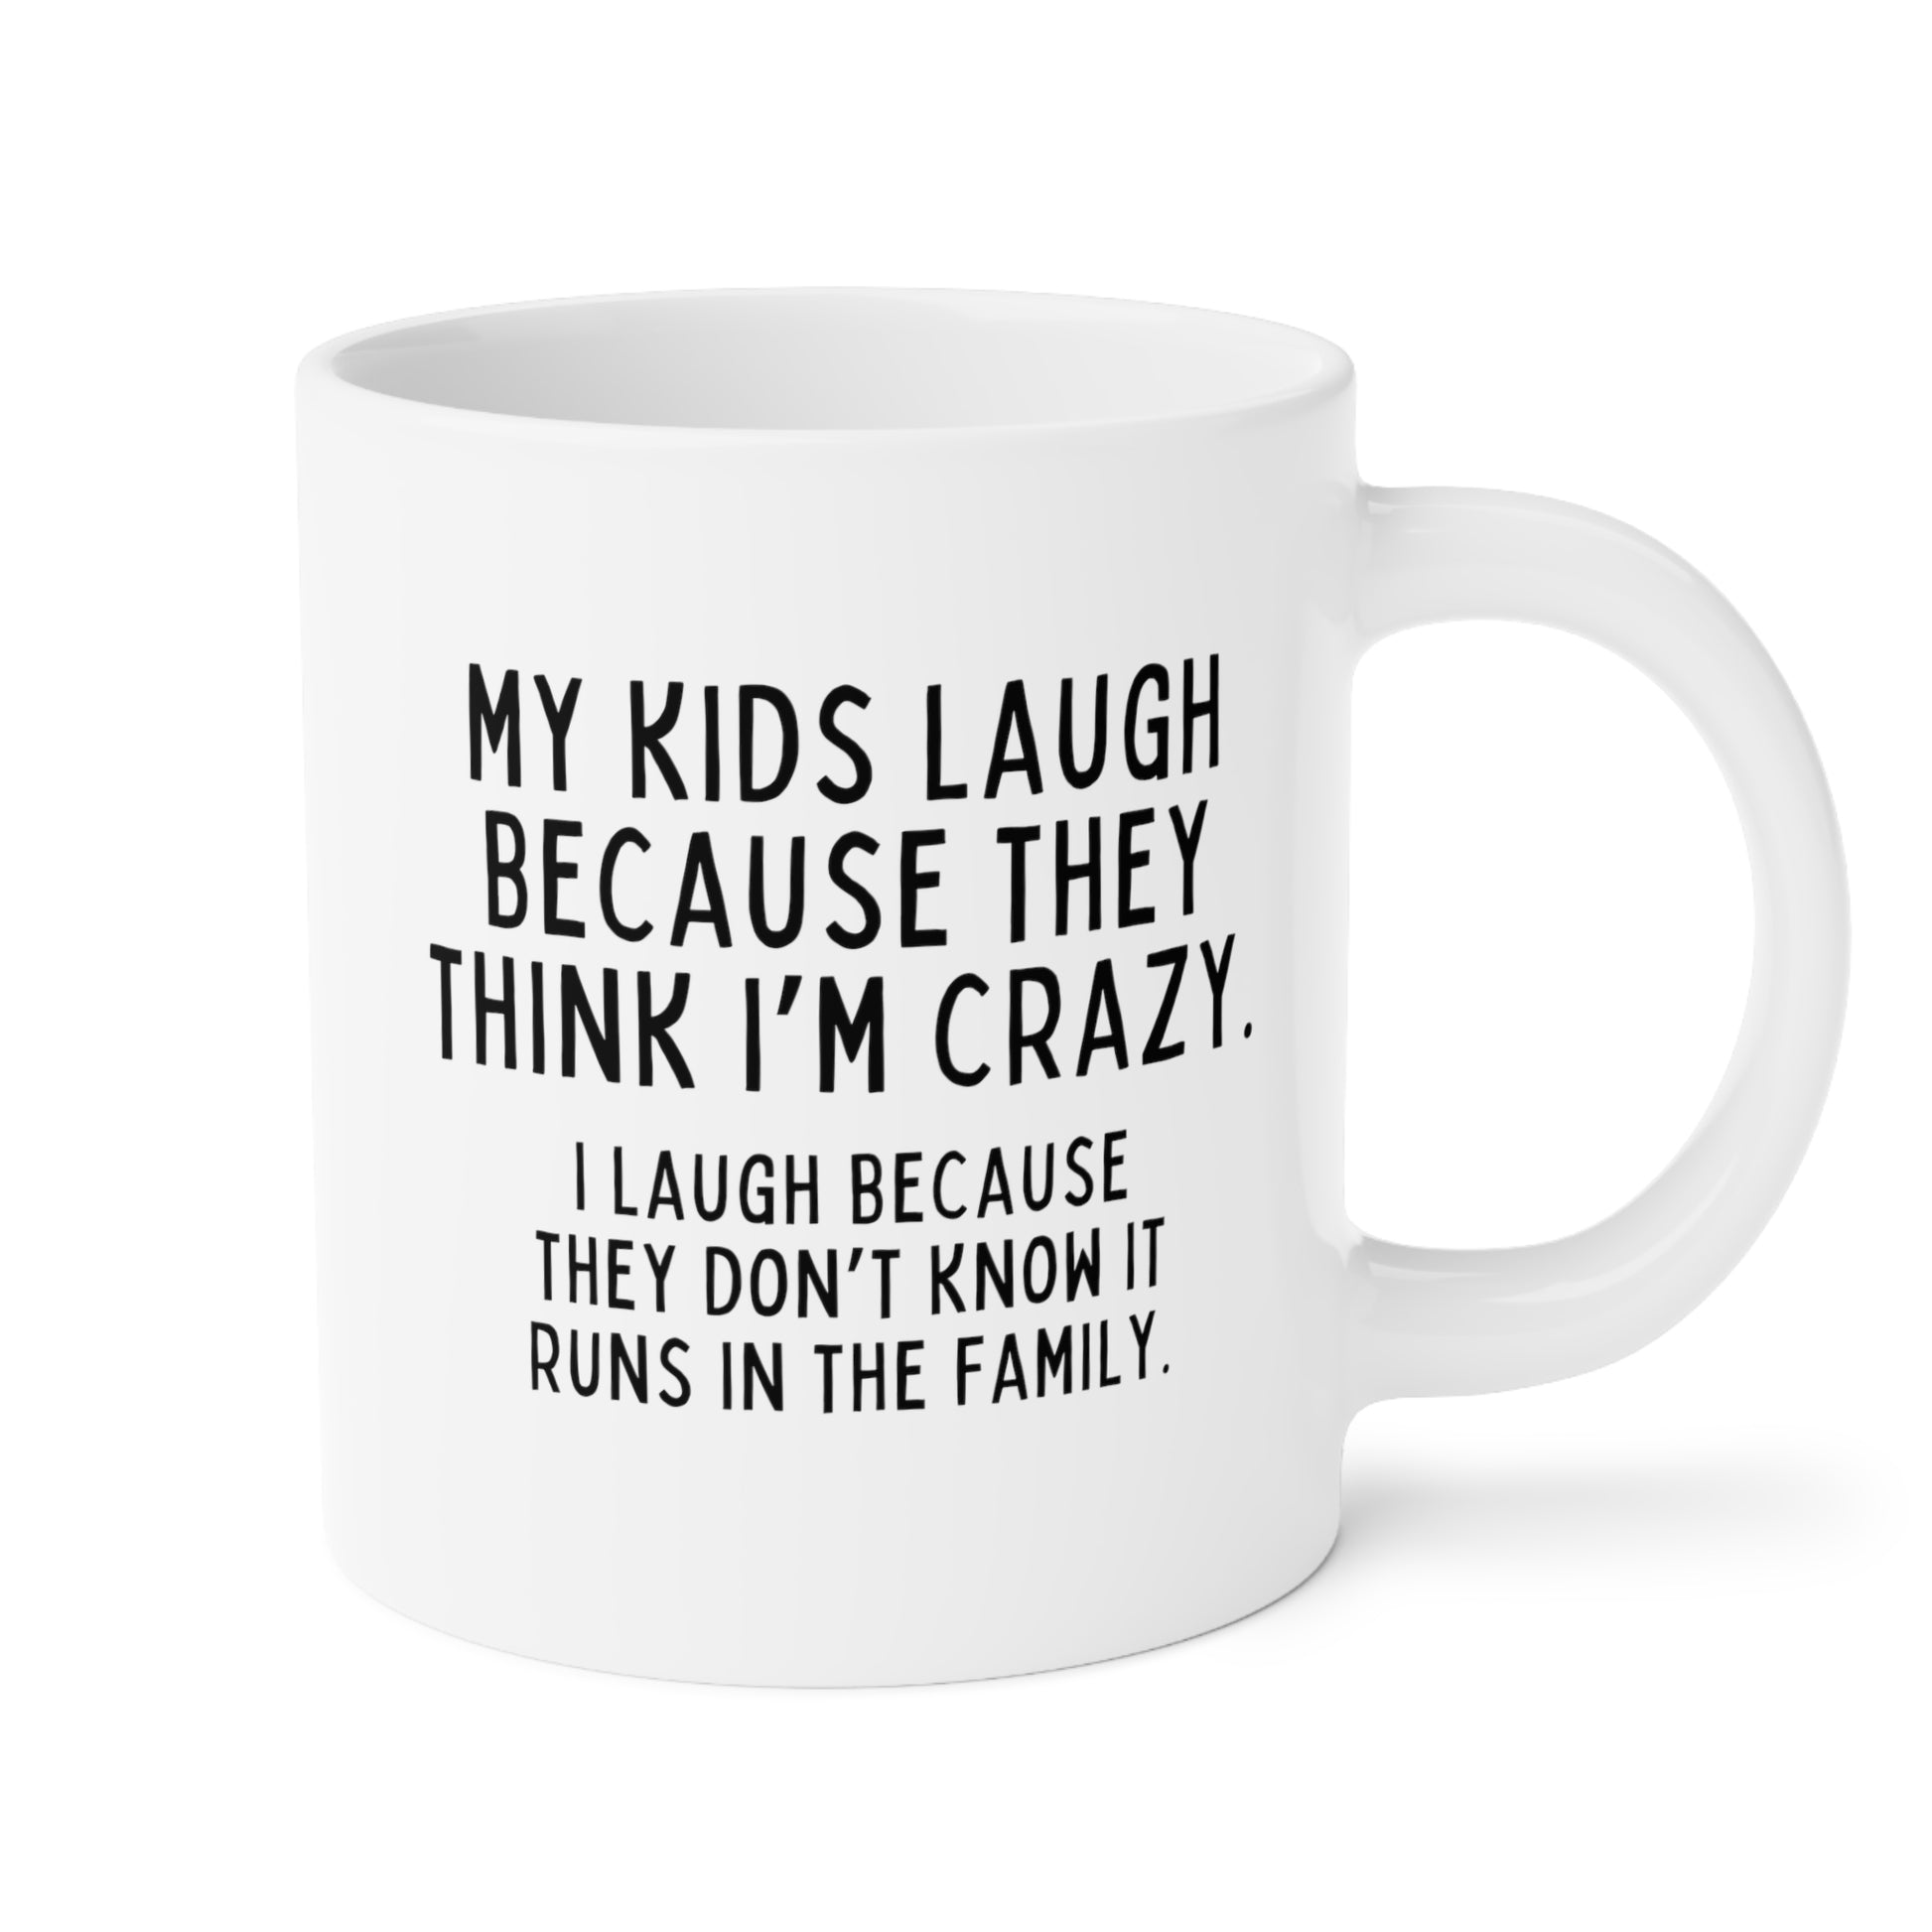 My Kids Laugh Because They Think Im Crazy I Laugh Because They Dont Know It Runs In The Family 20oz white funny large coffee mug gift dad mom birthday waveywares wavey wares wavywares wavy wares